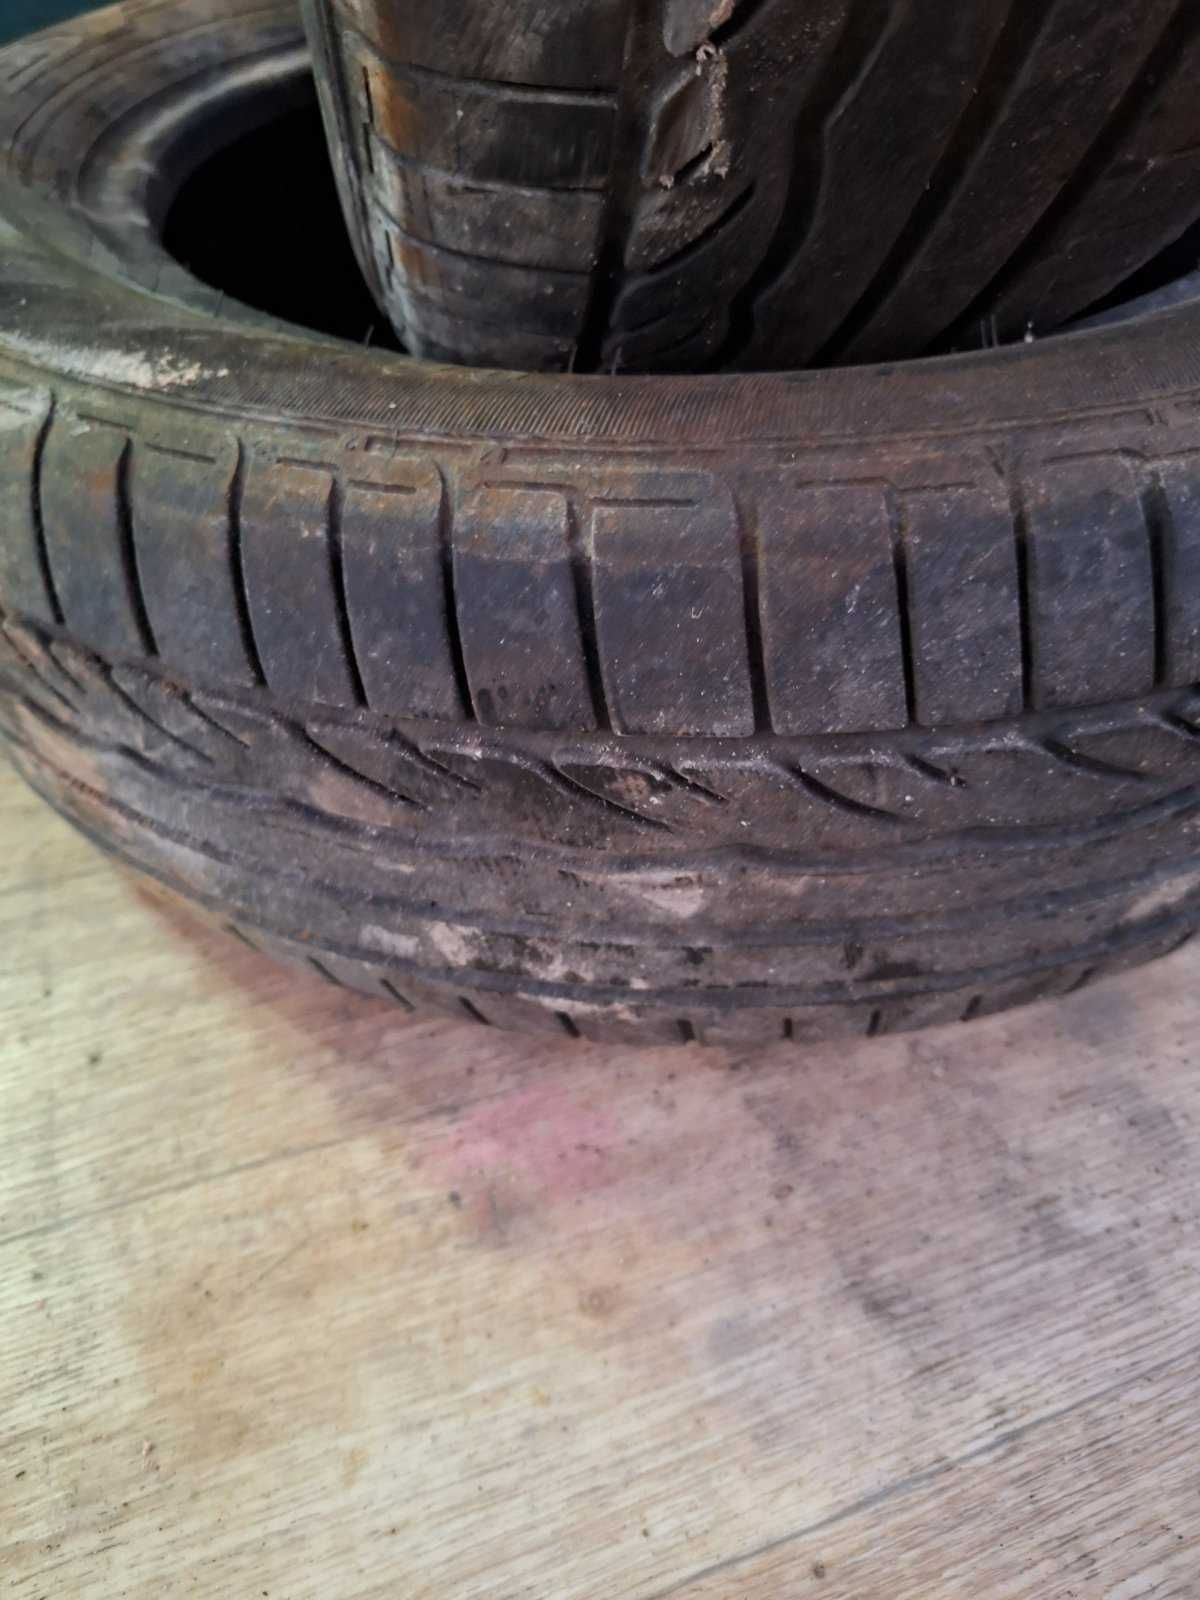 DUNLOP 185/ 60 r15 2013 2 покришки